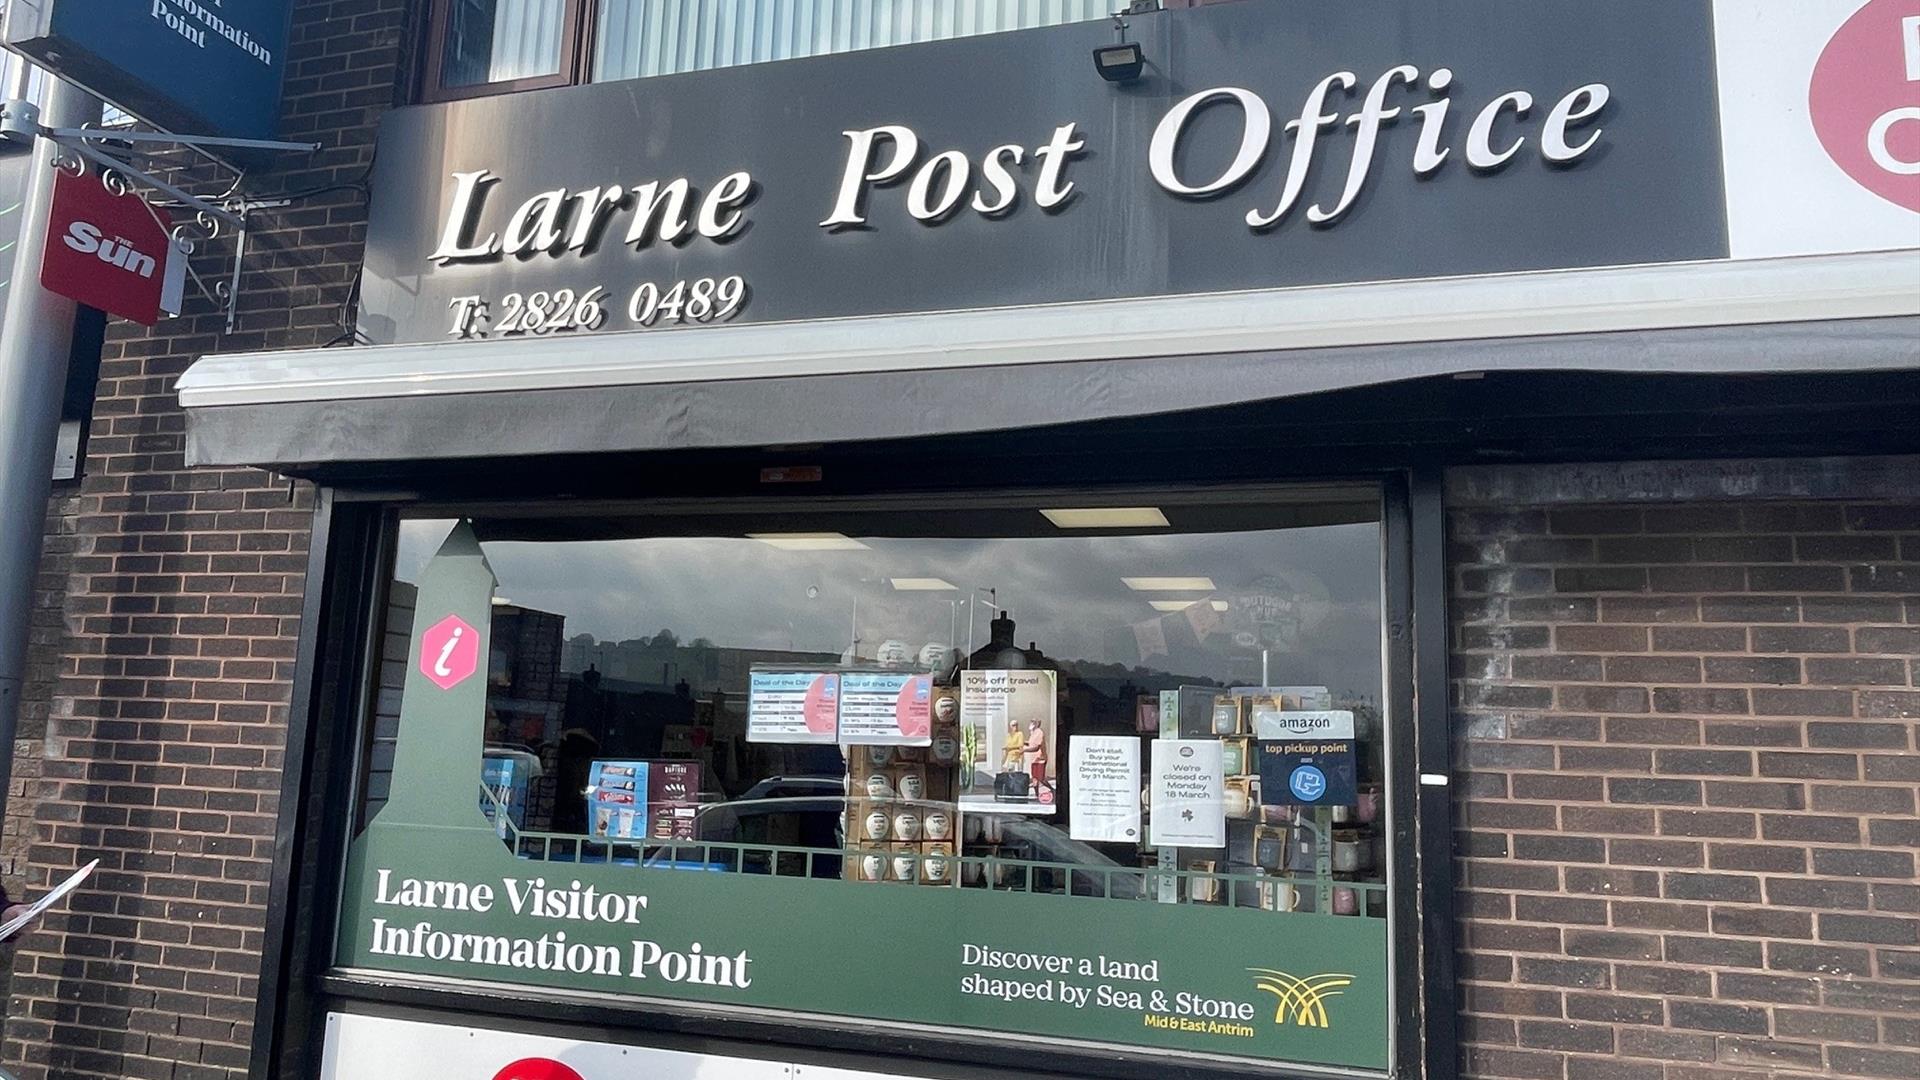 Exterior of the Book Nook in Larne with signage to promote Larne Post Office, Larne Visitor Information Point and MoneyGram